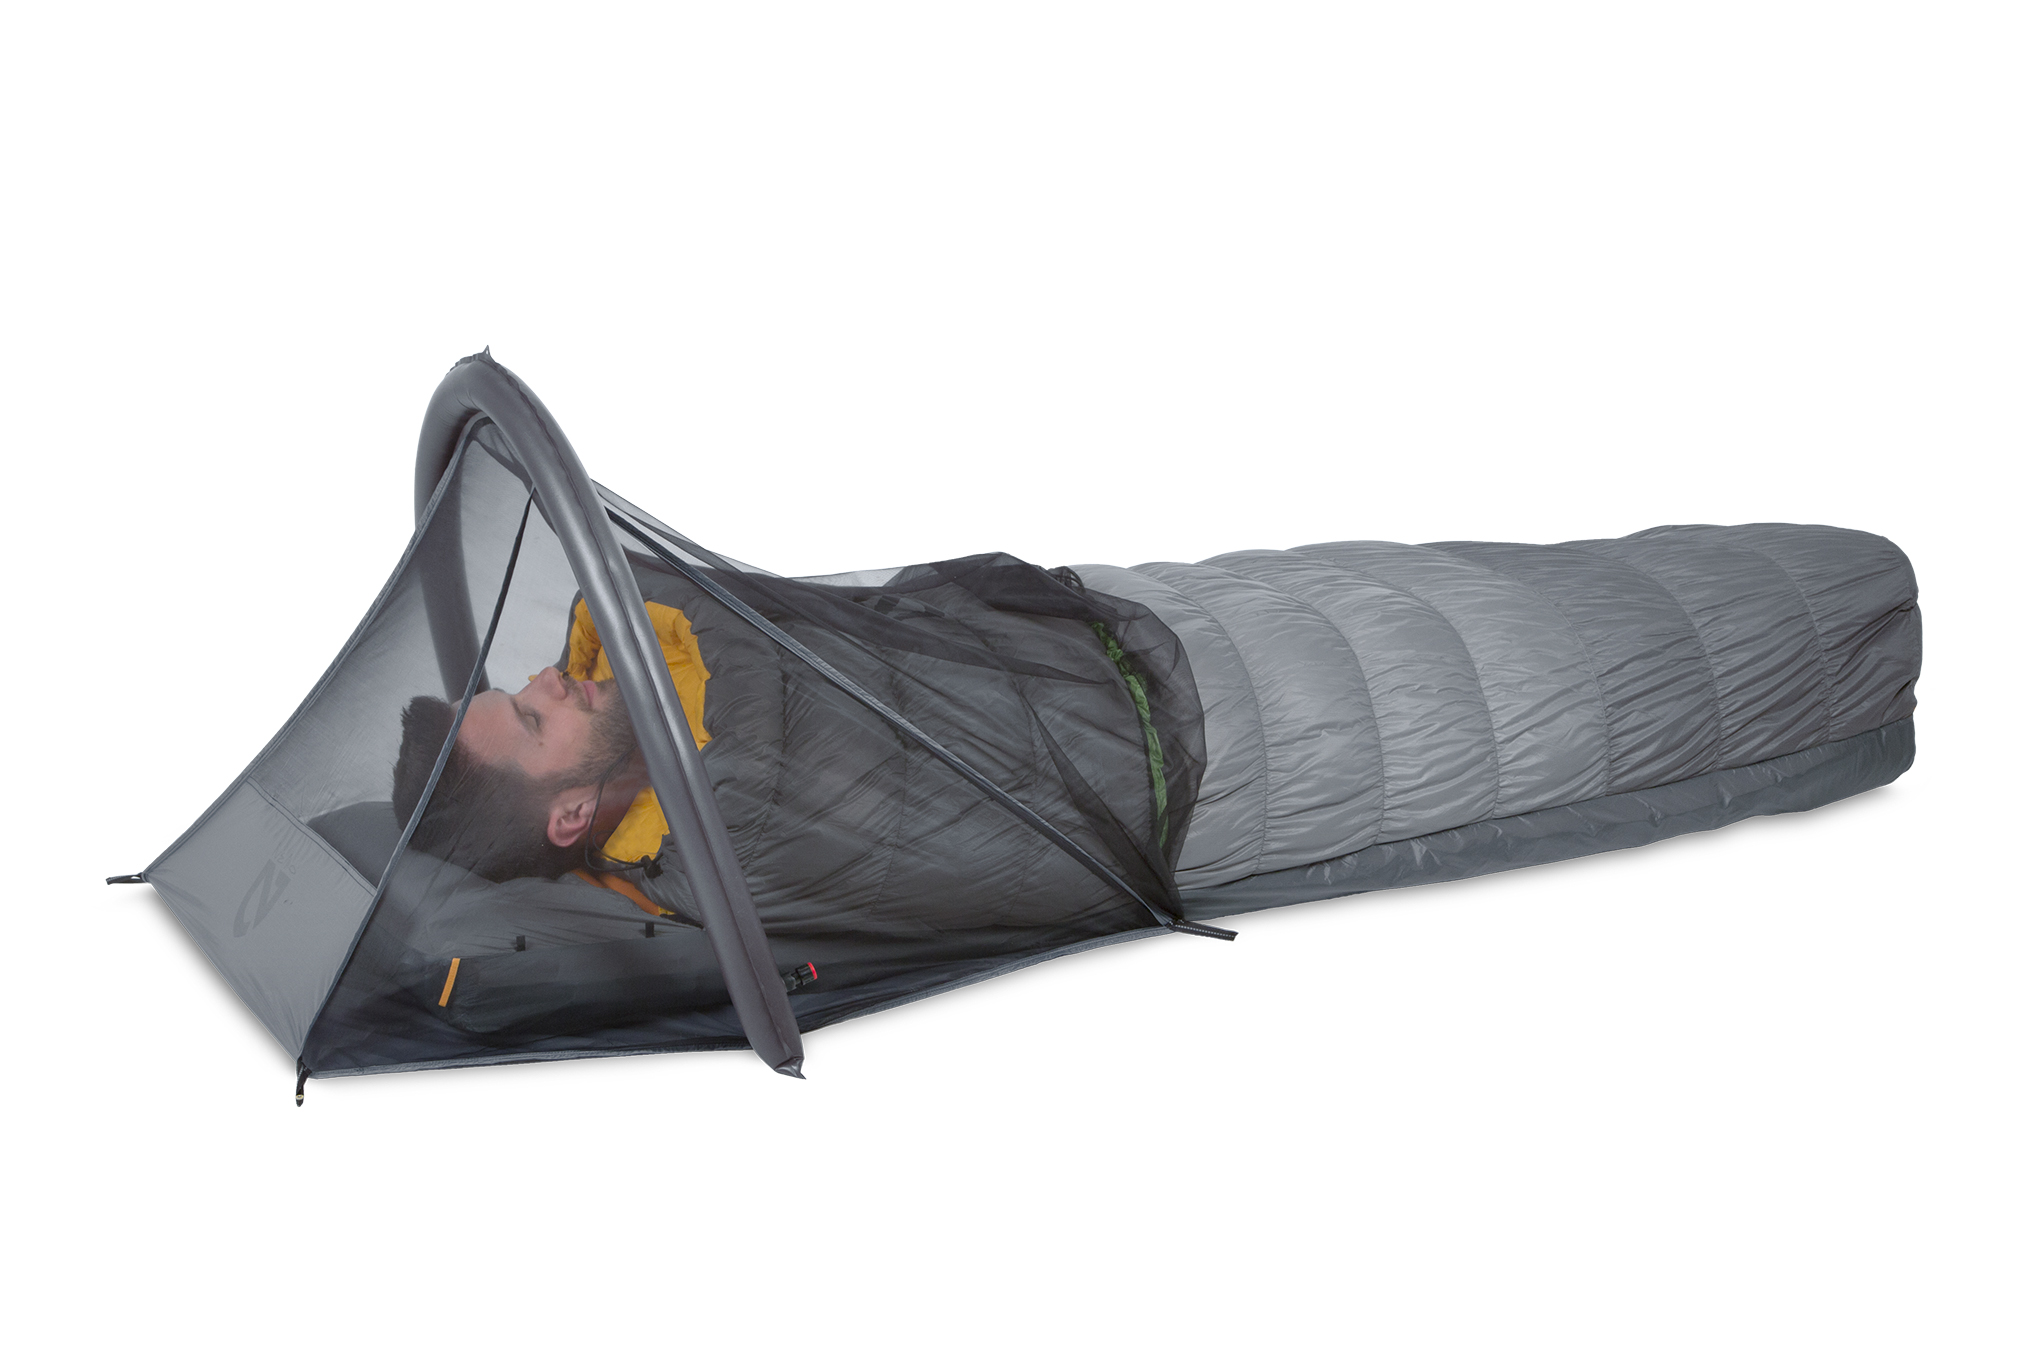 Nemo’s Outdoor Gear Is Made For Summer Hiking And Camping